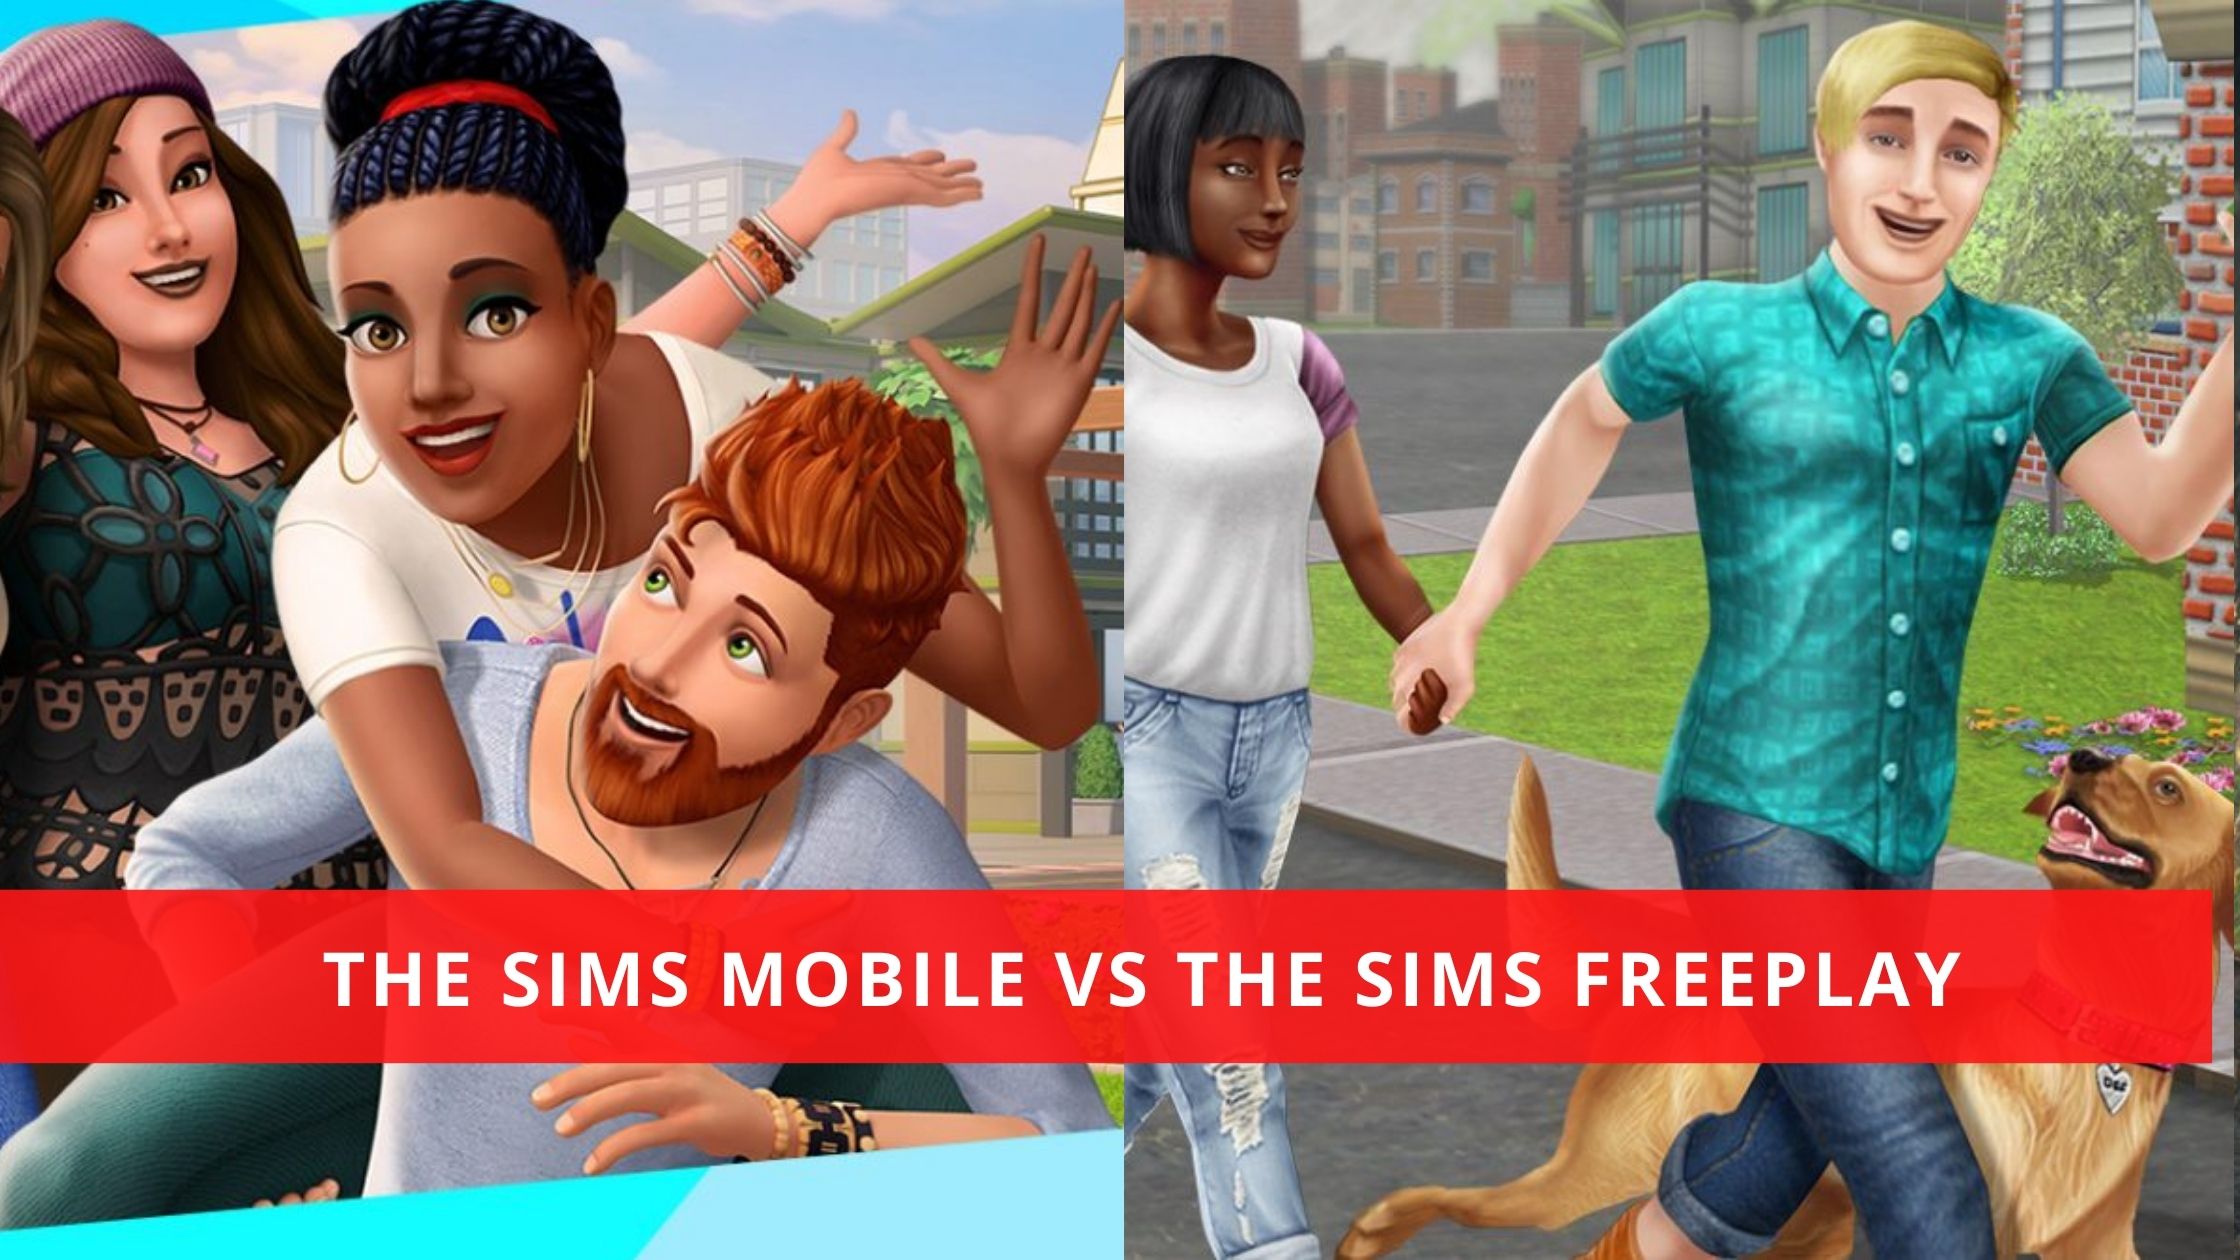 Major differences in between The Sims Mobile Vs The Sims Freeplay